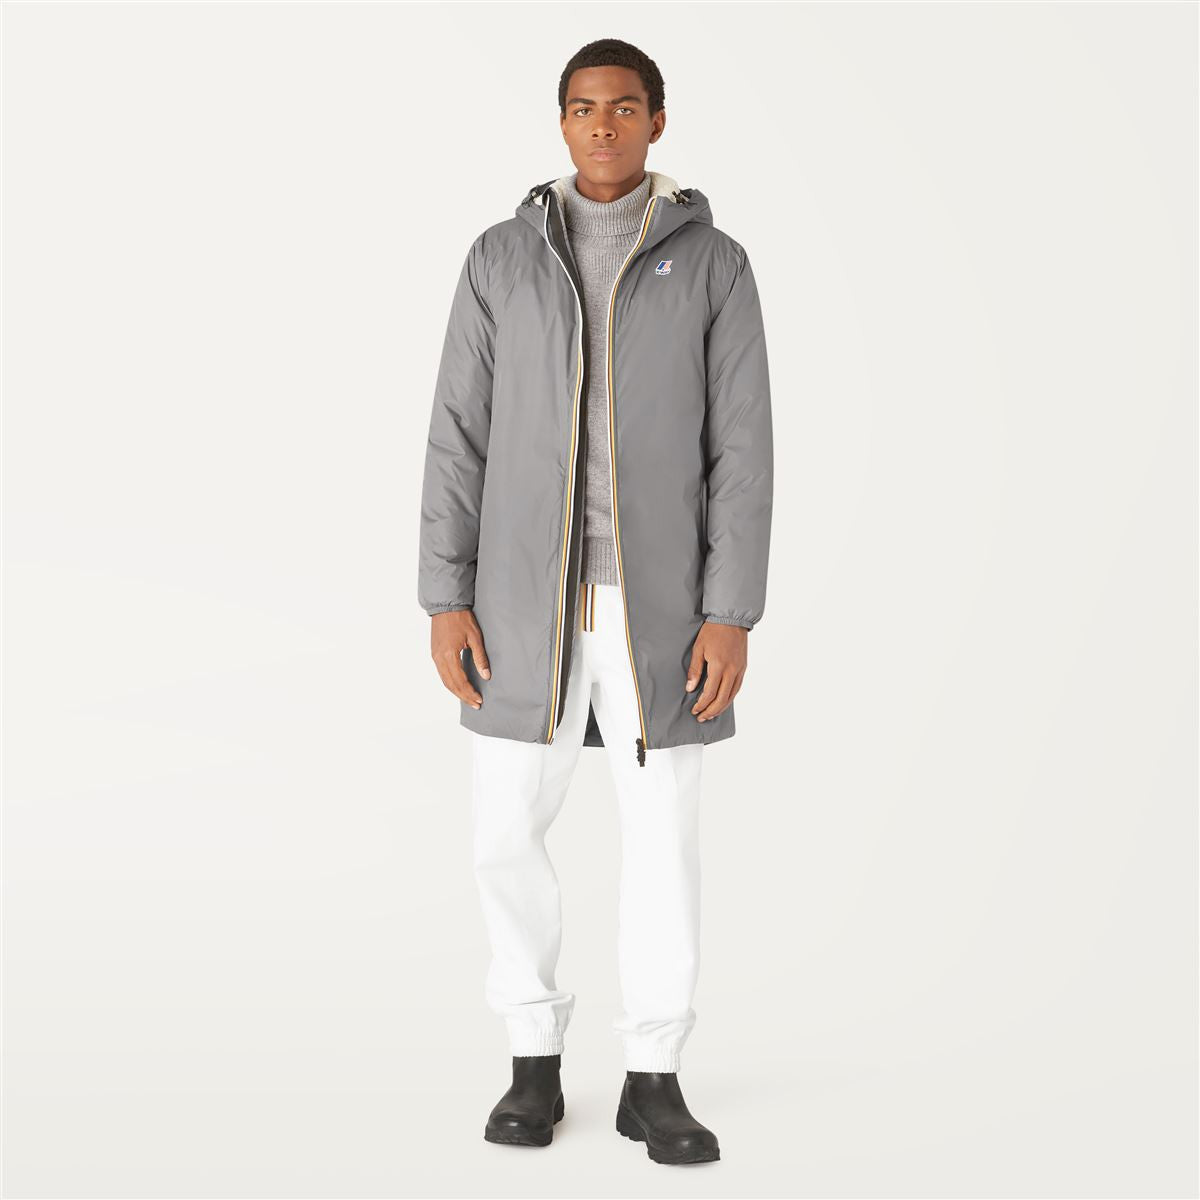 Eiffel Orsetto - Unisex Packable Lined Long Rain Jacket in Grey Smoked